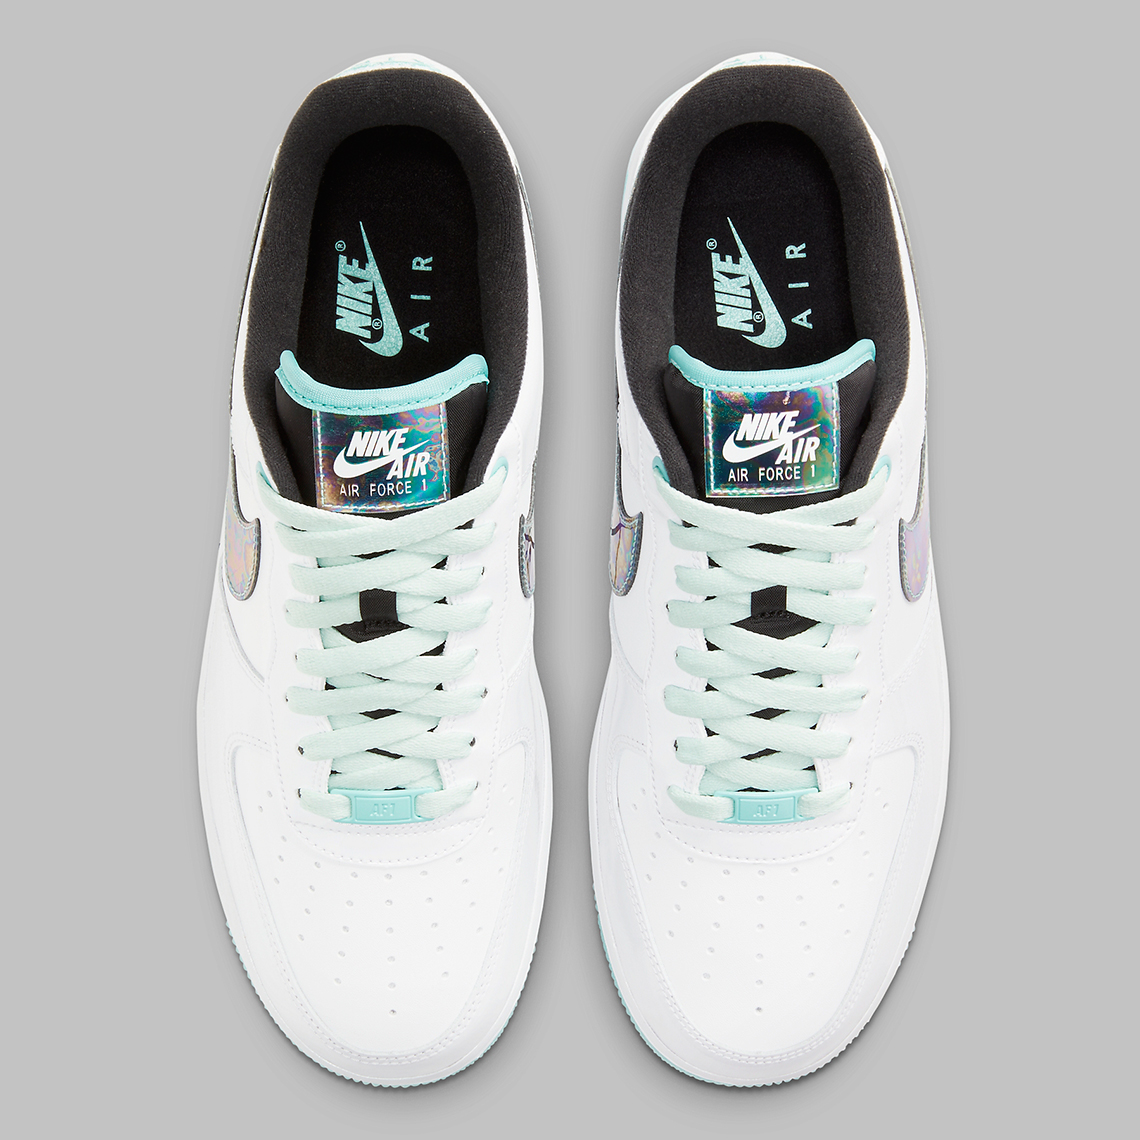 nike Air Force dimension 1 low white abalone DD9613 100 4